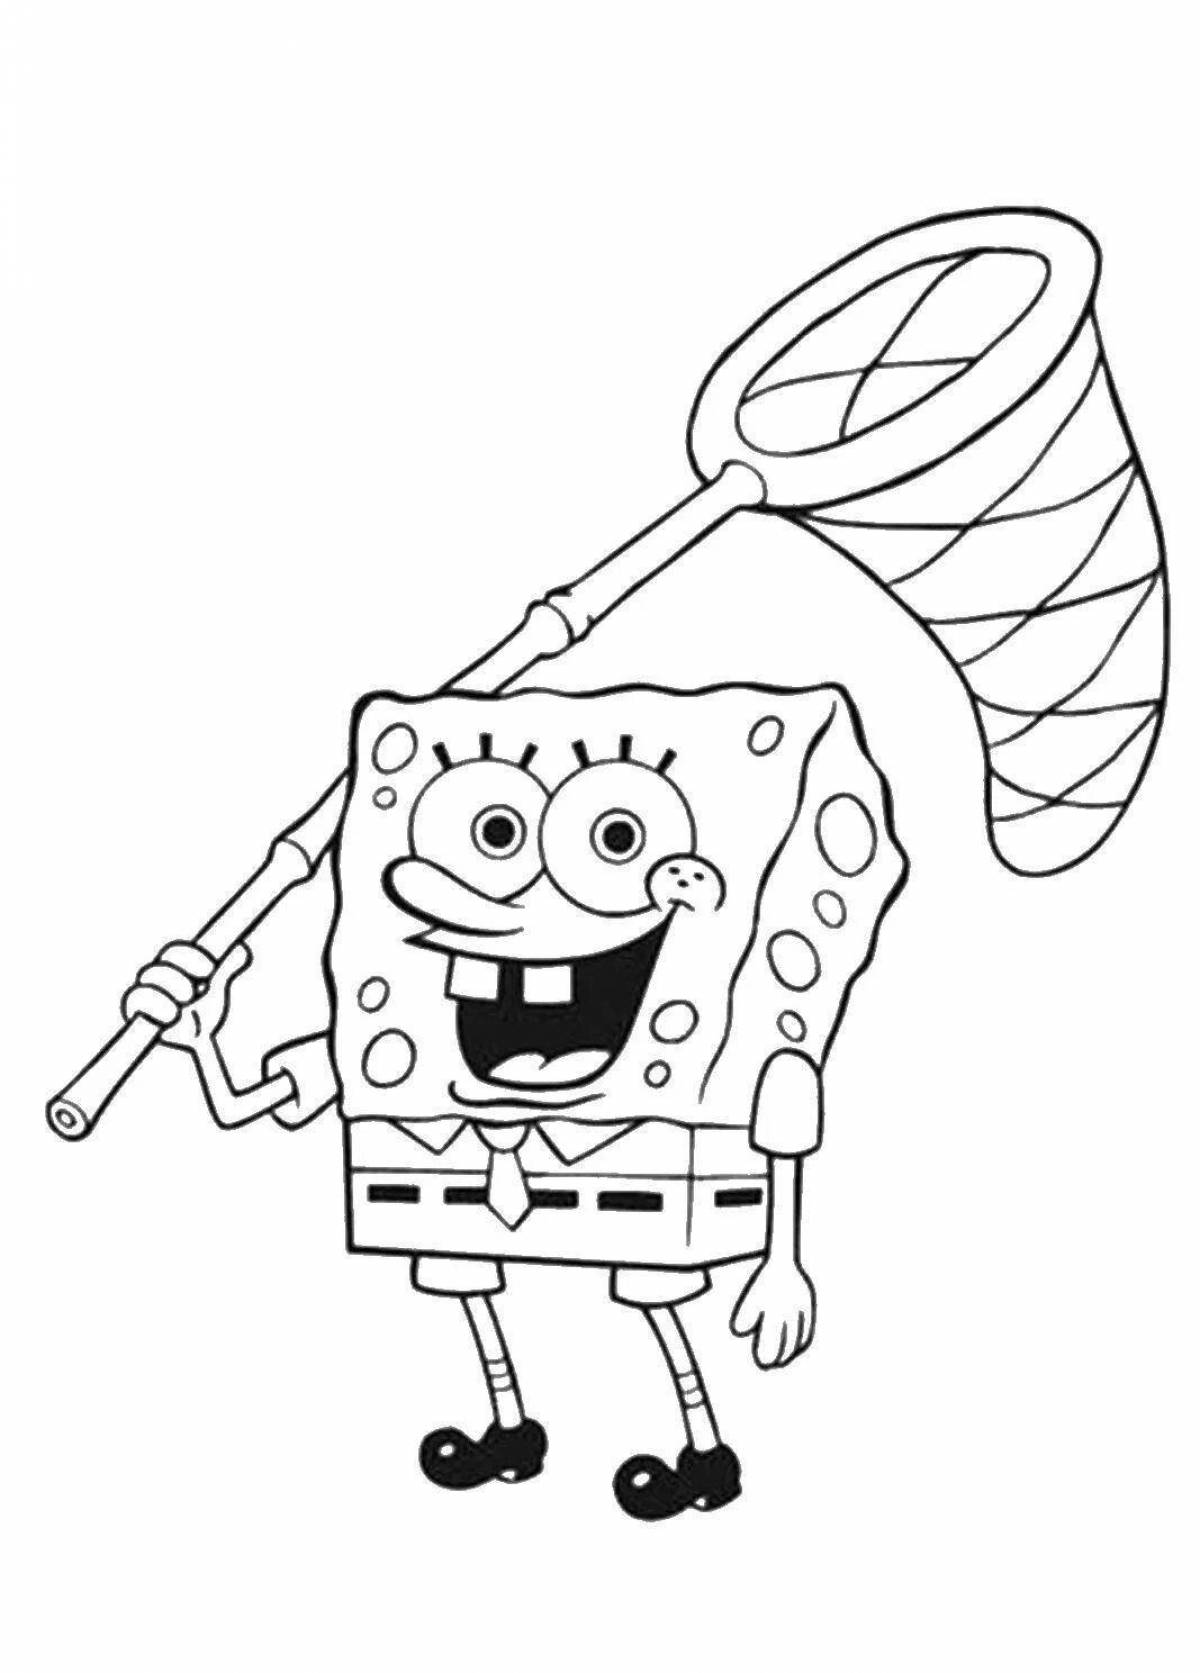 Spongebob coloring page with colorful charms